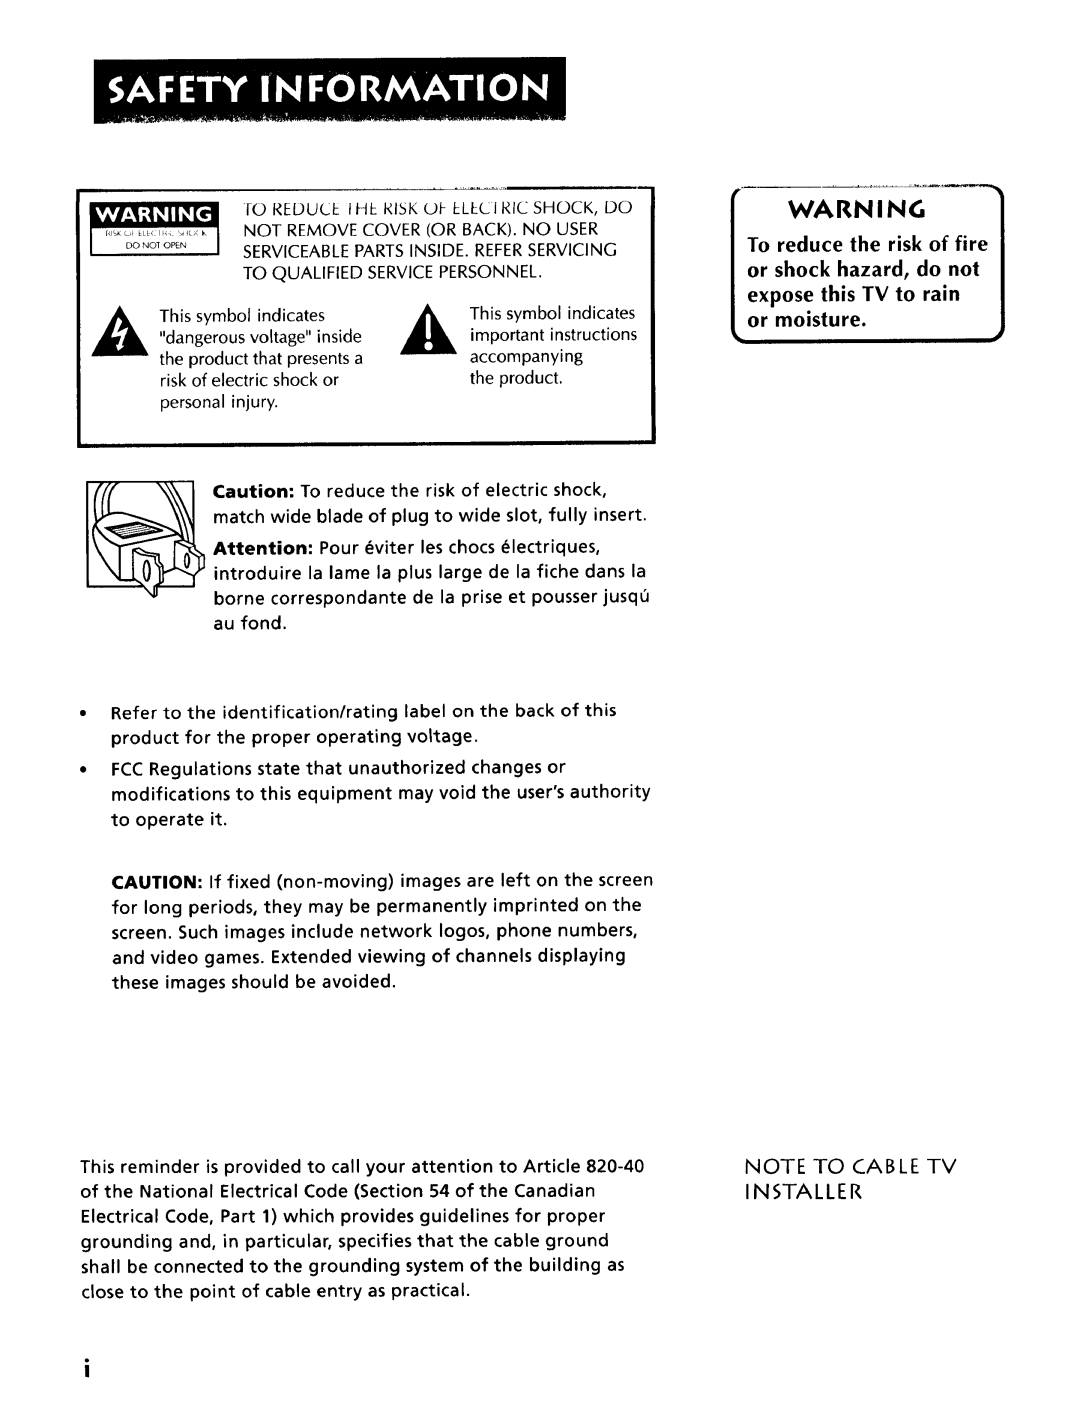 Sears 274.4345869A owner manual Note To Cable Tv Installer, To reduce the risk of fire or shock hazard, do not 